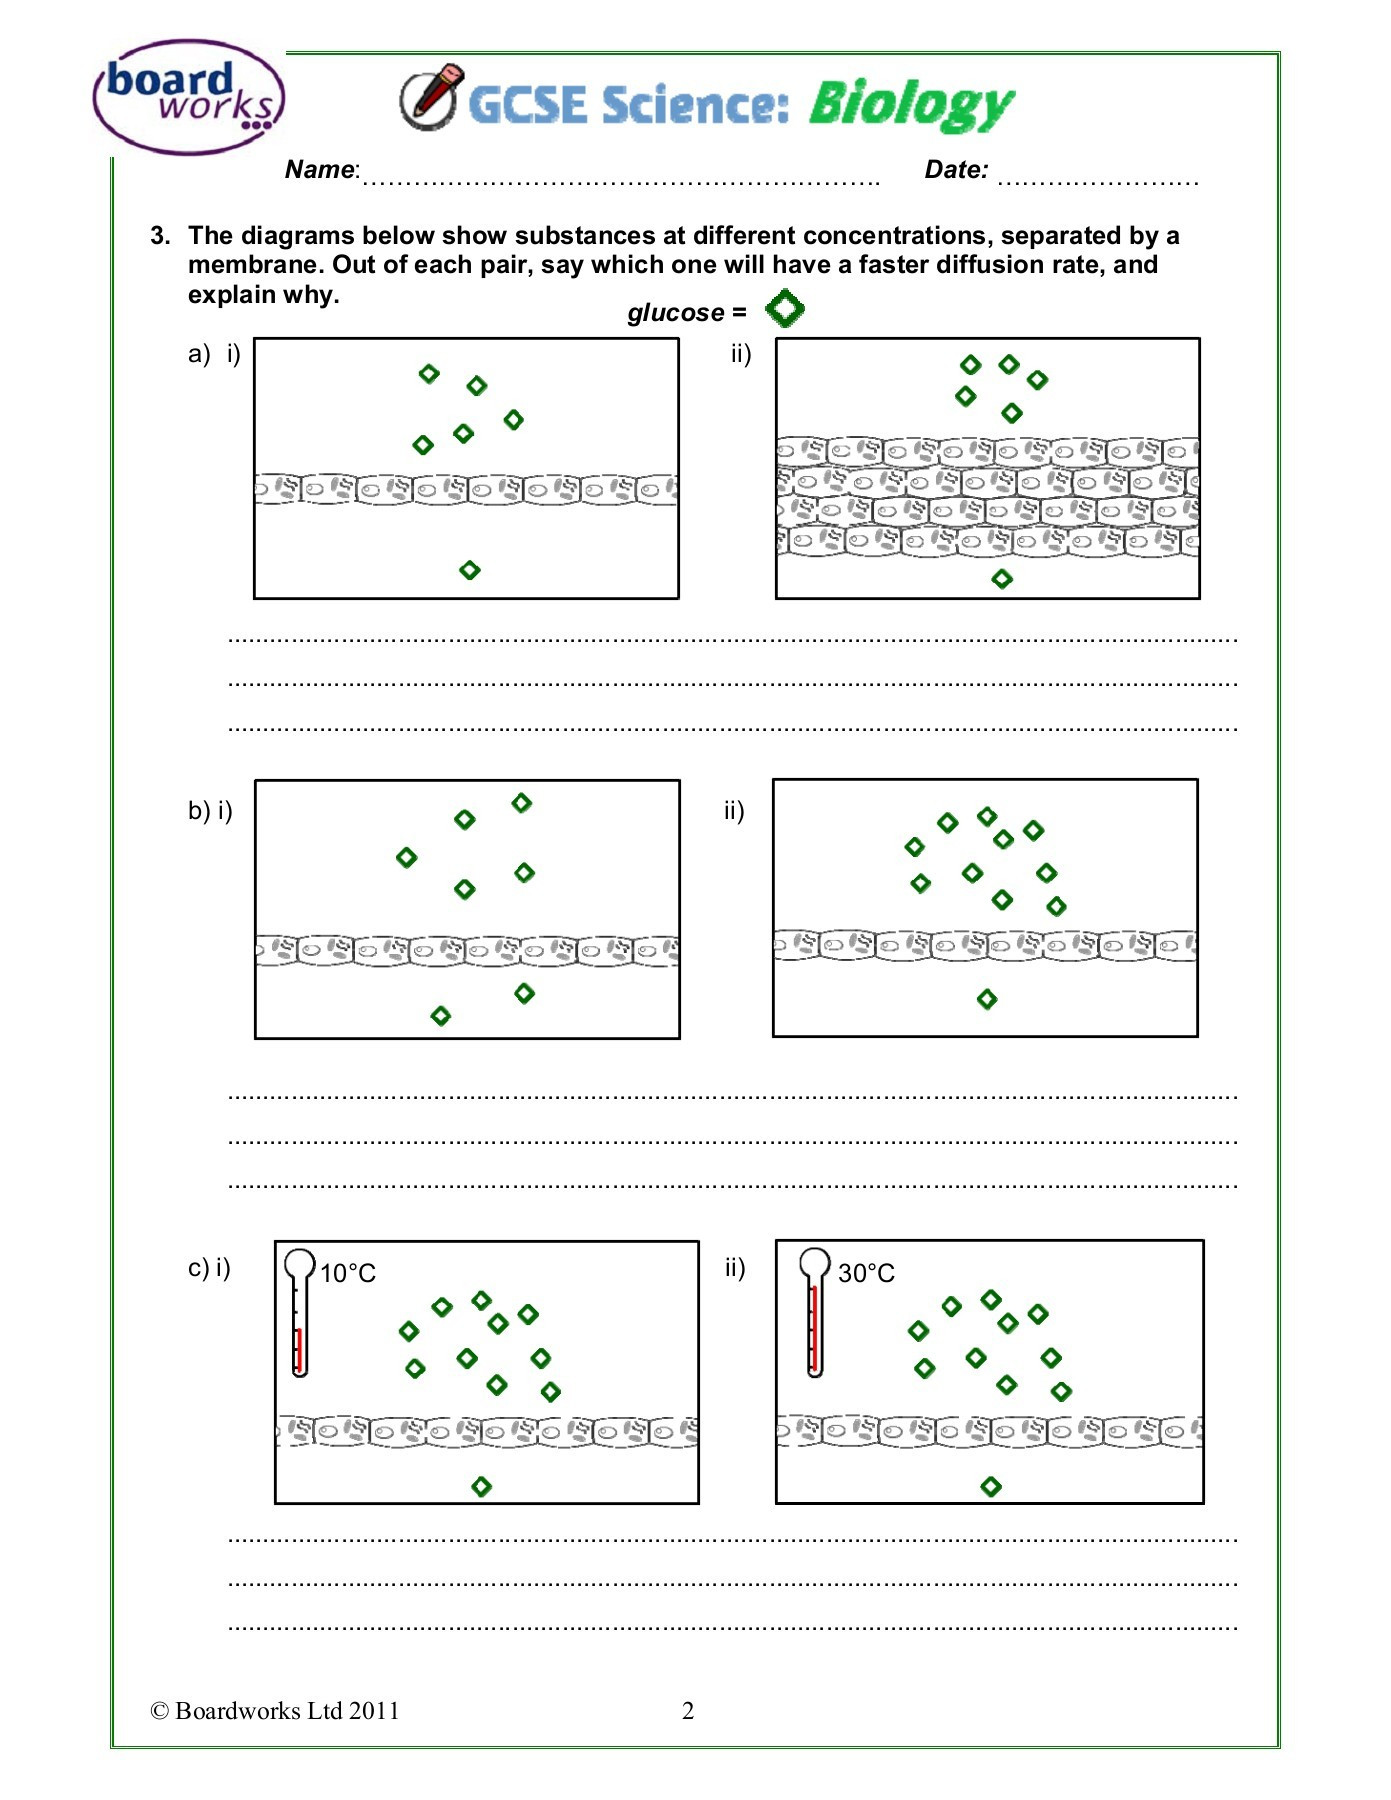 Transport In Cells Worksheet Diffusion Osmosis and Active Transport Worksheet Pages 1 4